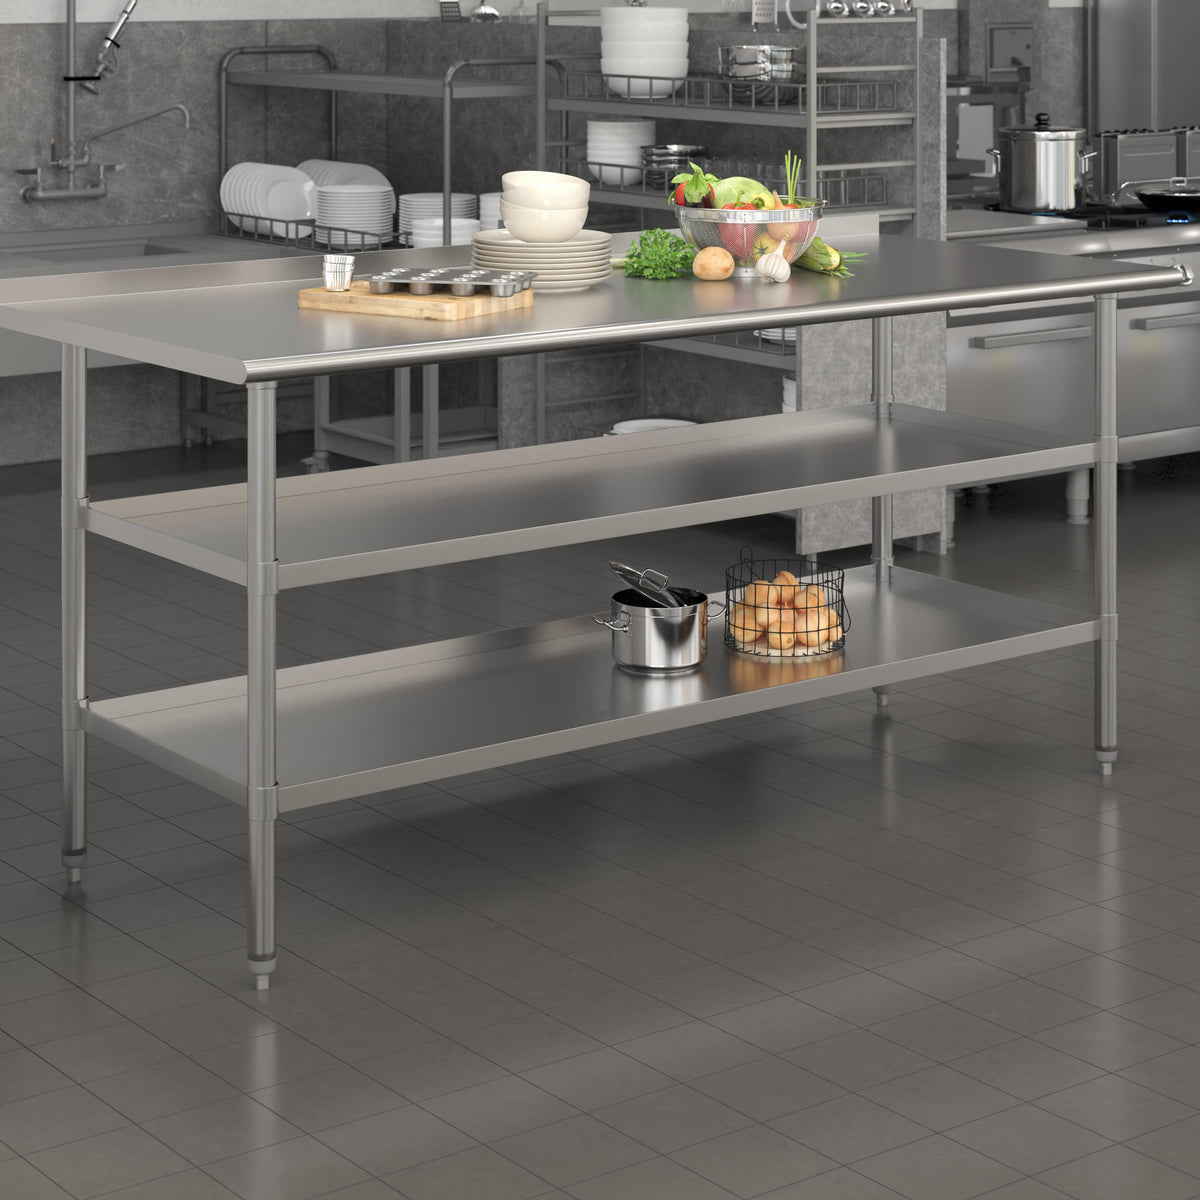 72"W x 30"D |#| 72"W x 30"D NSF Stainless Steel 18 Gauge Work Table - Backsplash and 2 Shelves